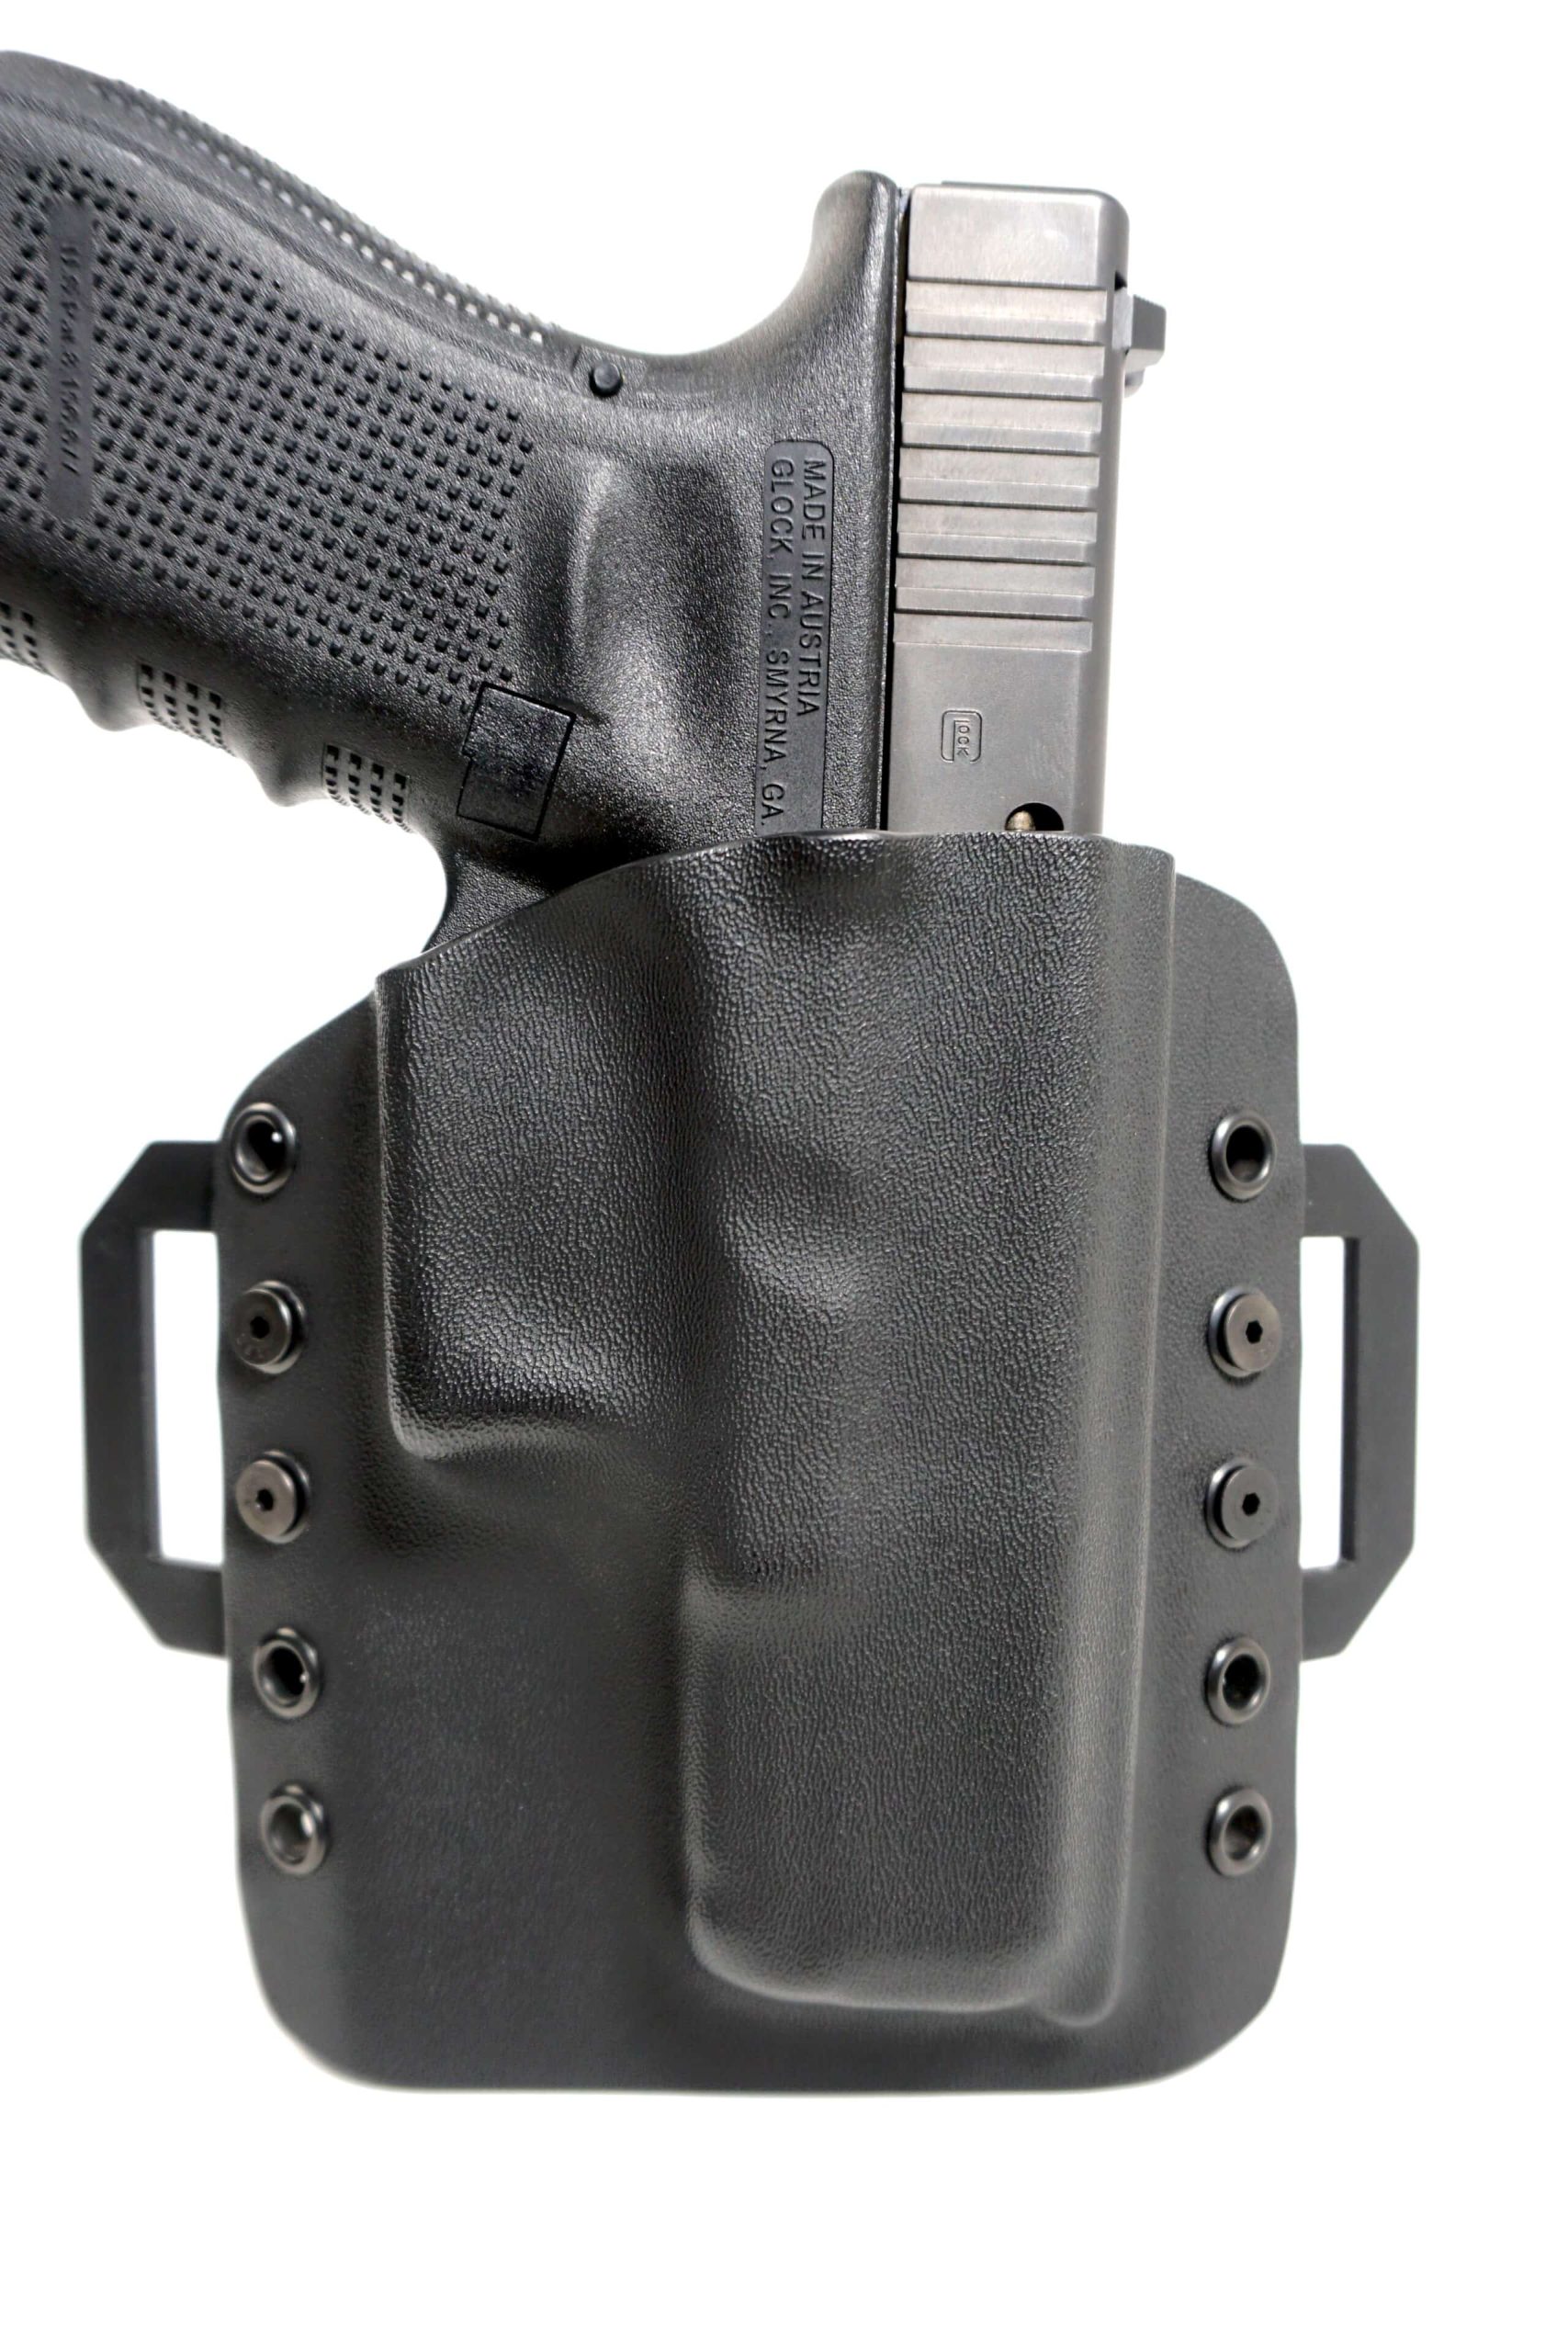 Kydex Inside Waistband Holster For HK USP 9mm .40 Compact